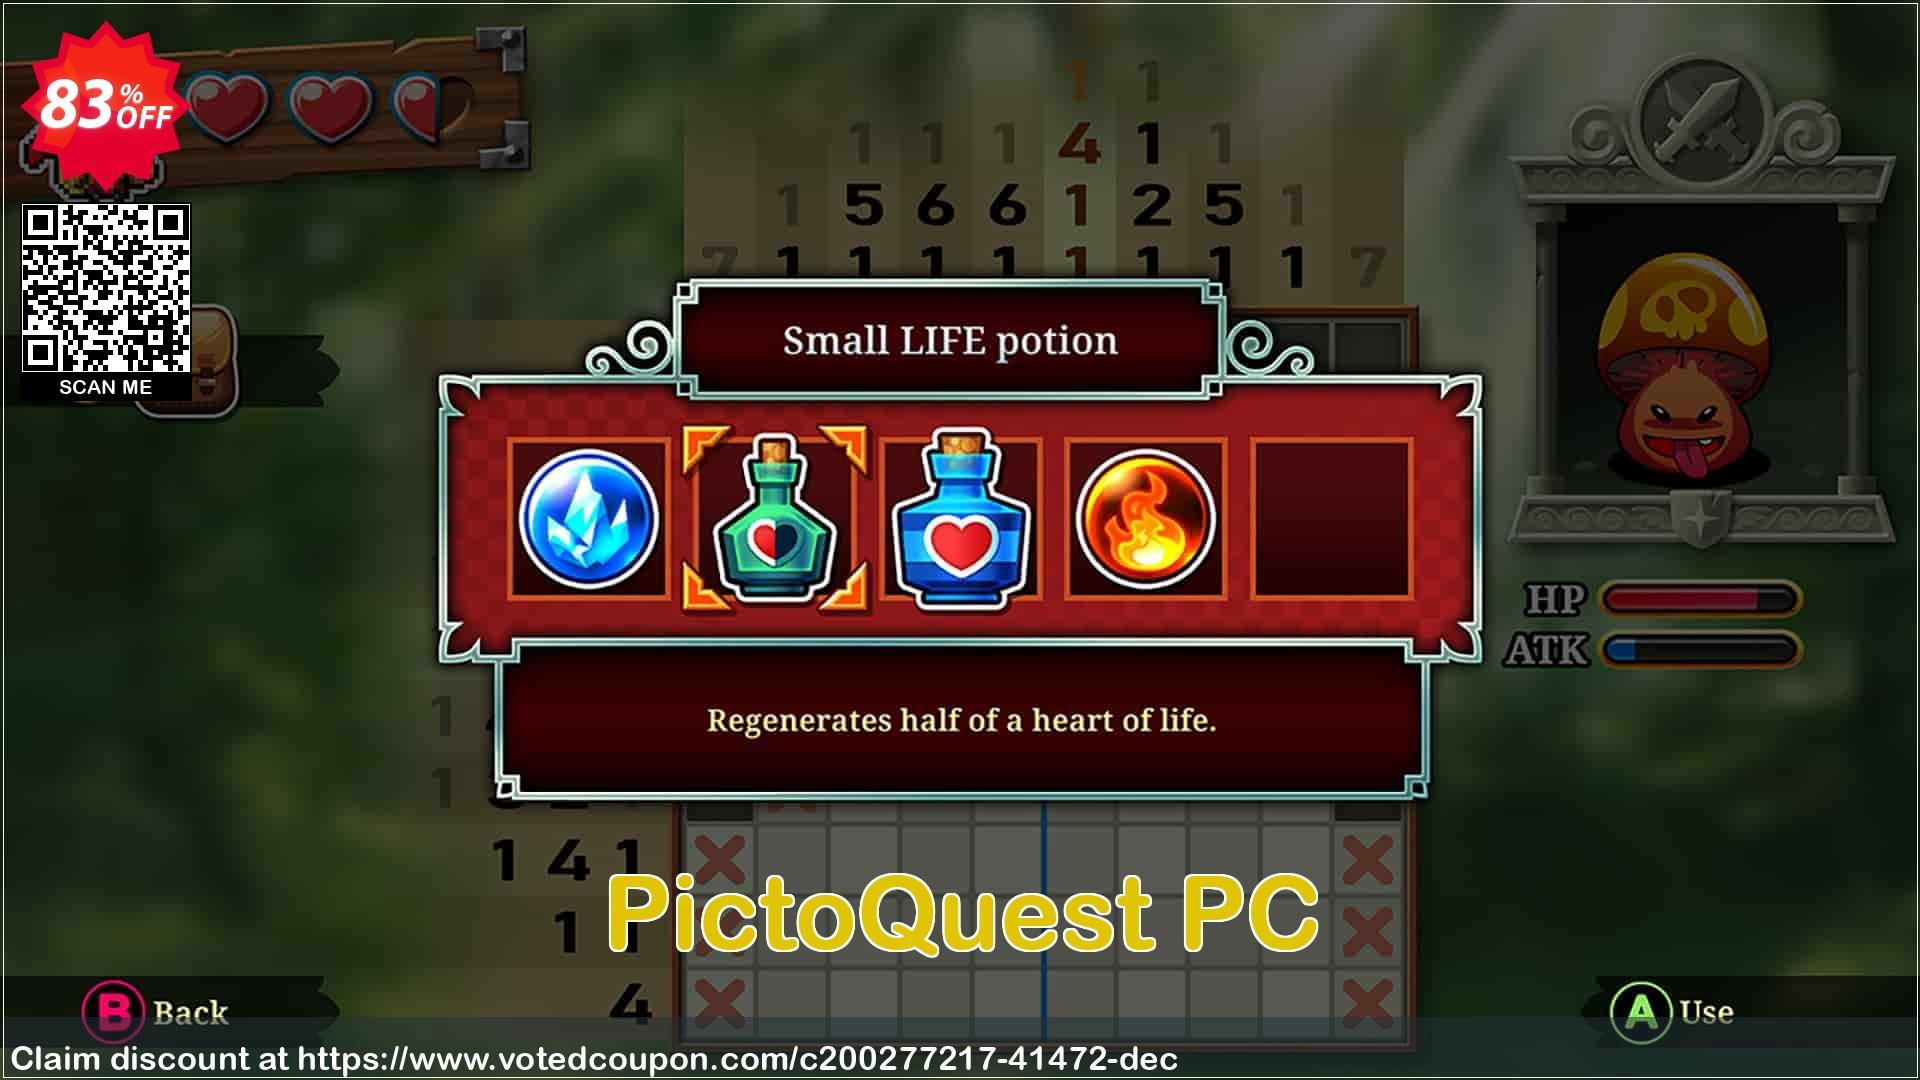 PictoQuest PC Coupon Code May 2024, 83% OFF - VotedCoupon